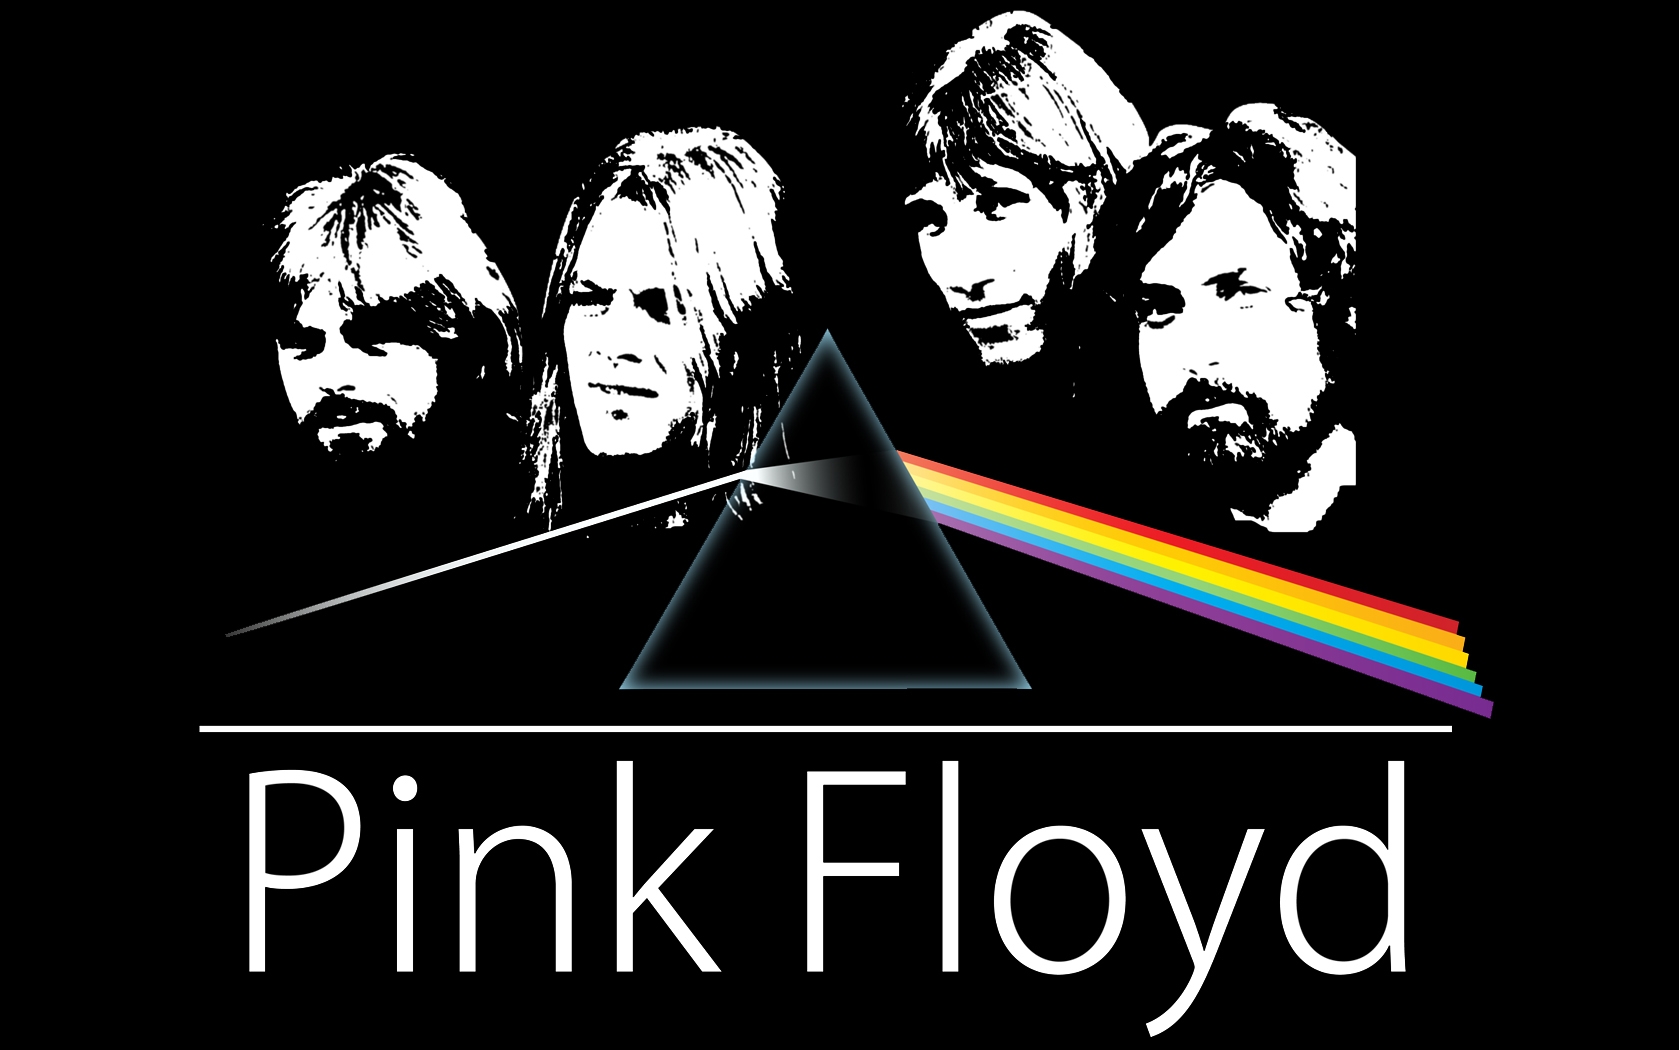 Famous British band Pink Floyd to release first album in 20 years